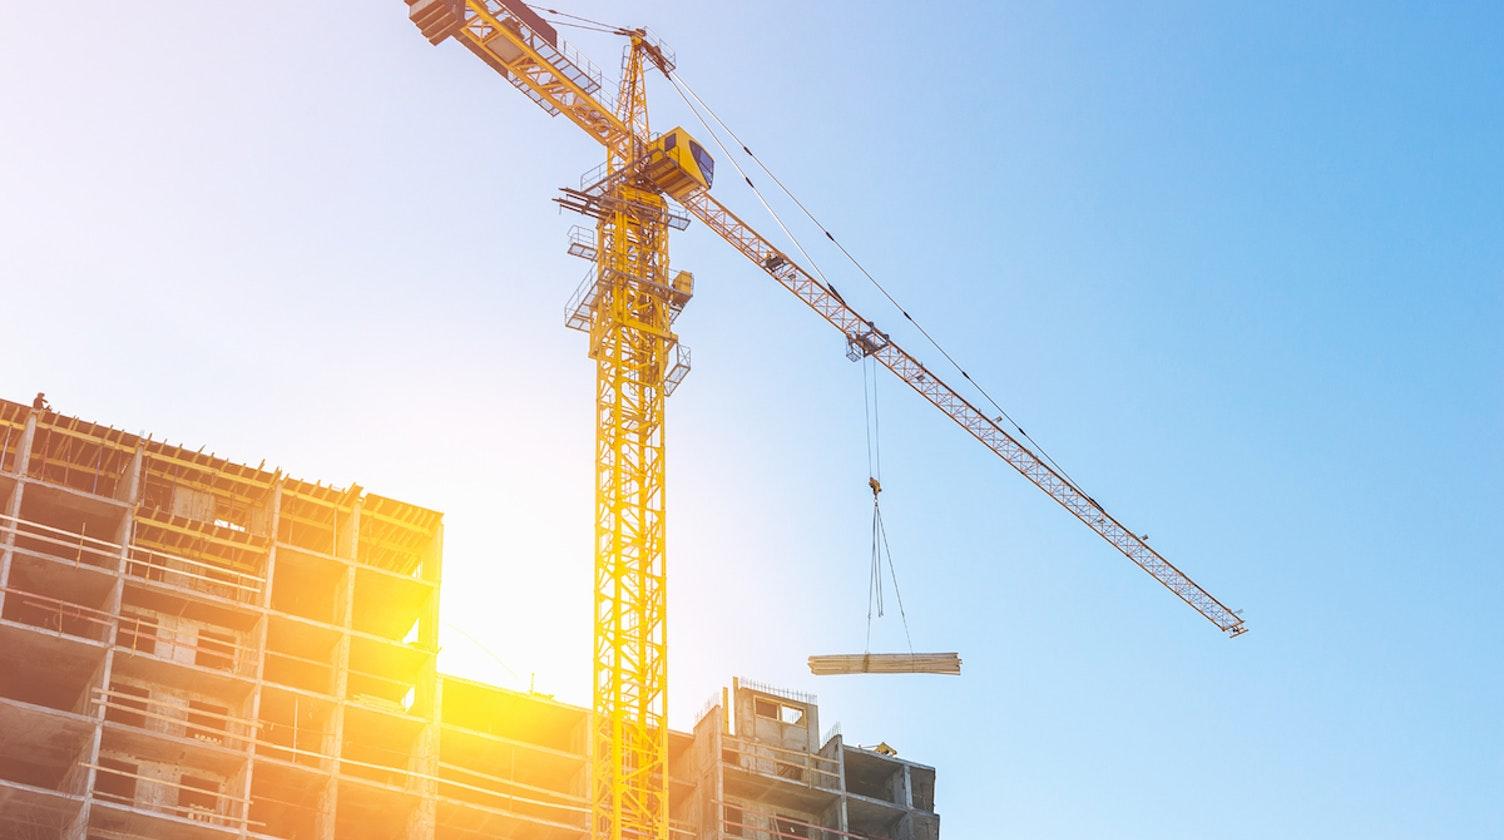 HOW DOES BUYING A PRE CONSTRUCTION CONDO WORK